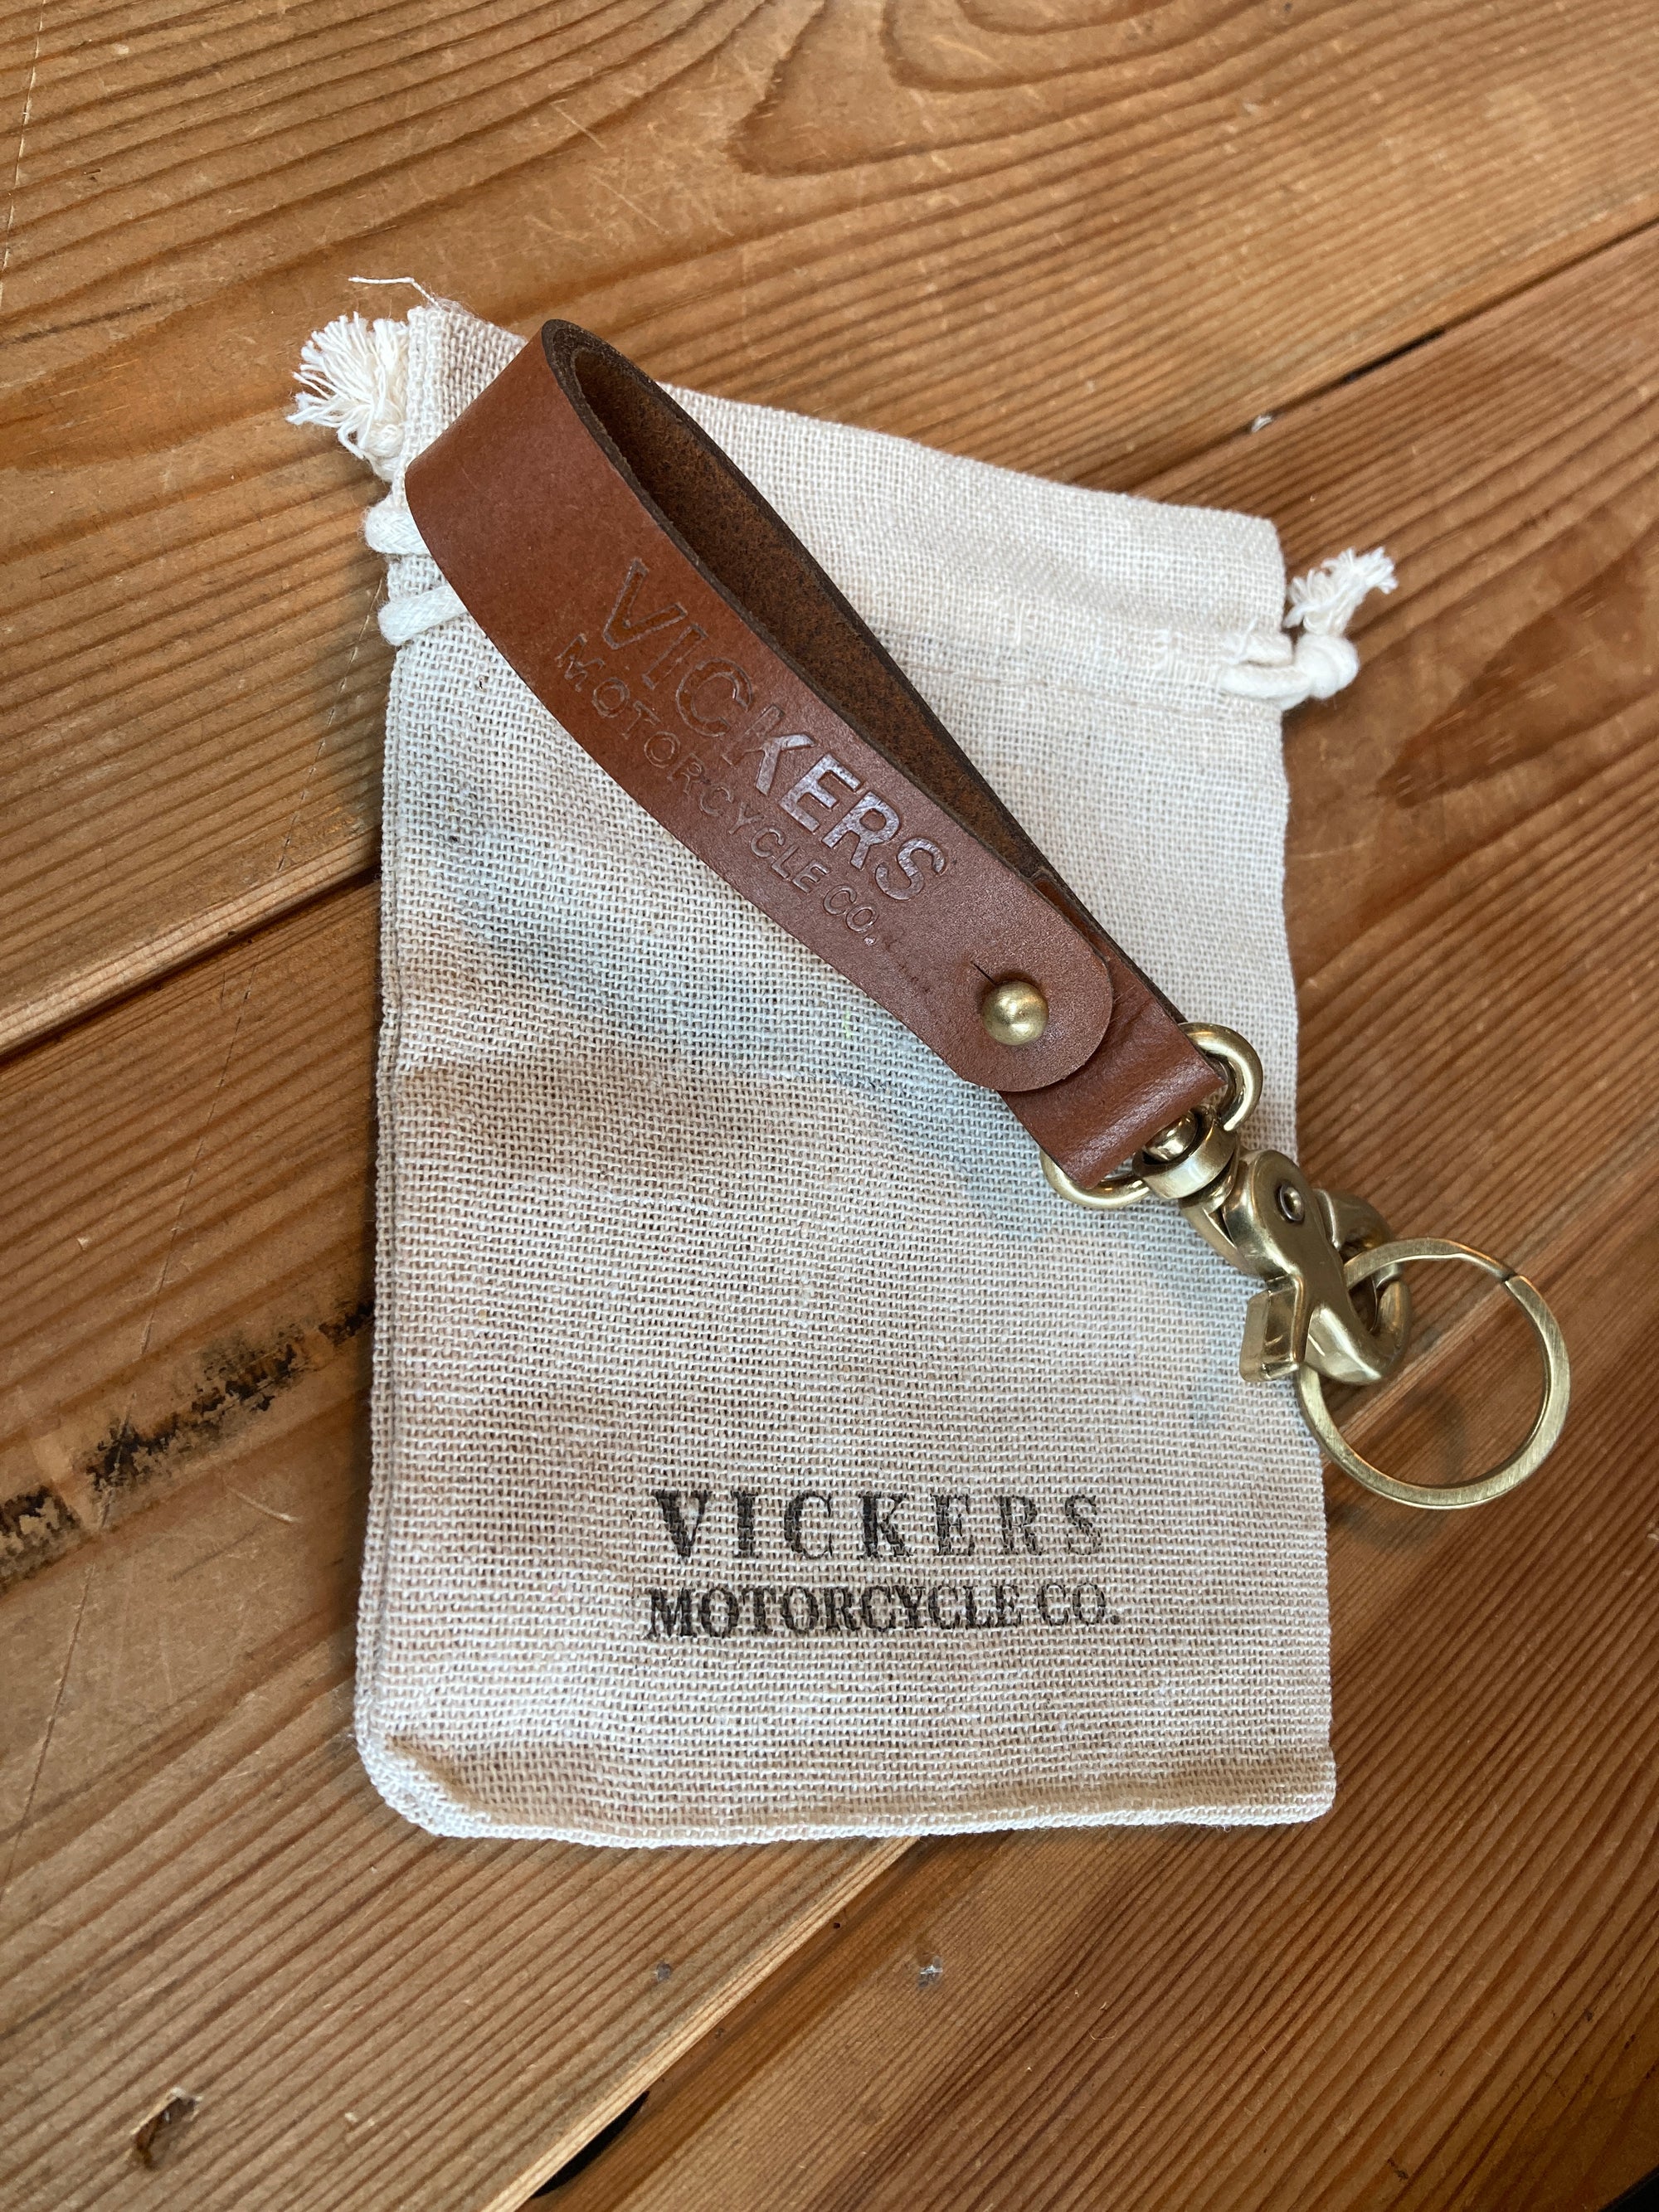 Vickers Motorcycle Co. Leather with Brass Key Ring